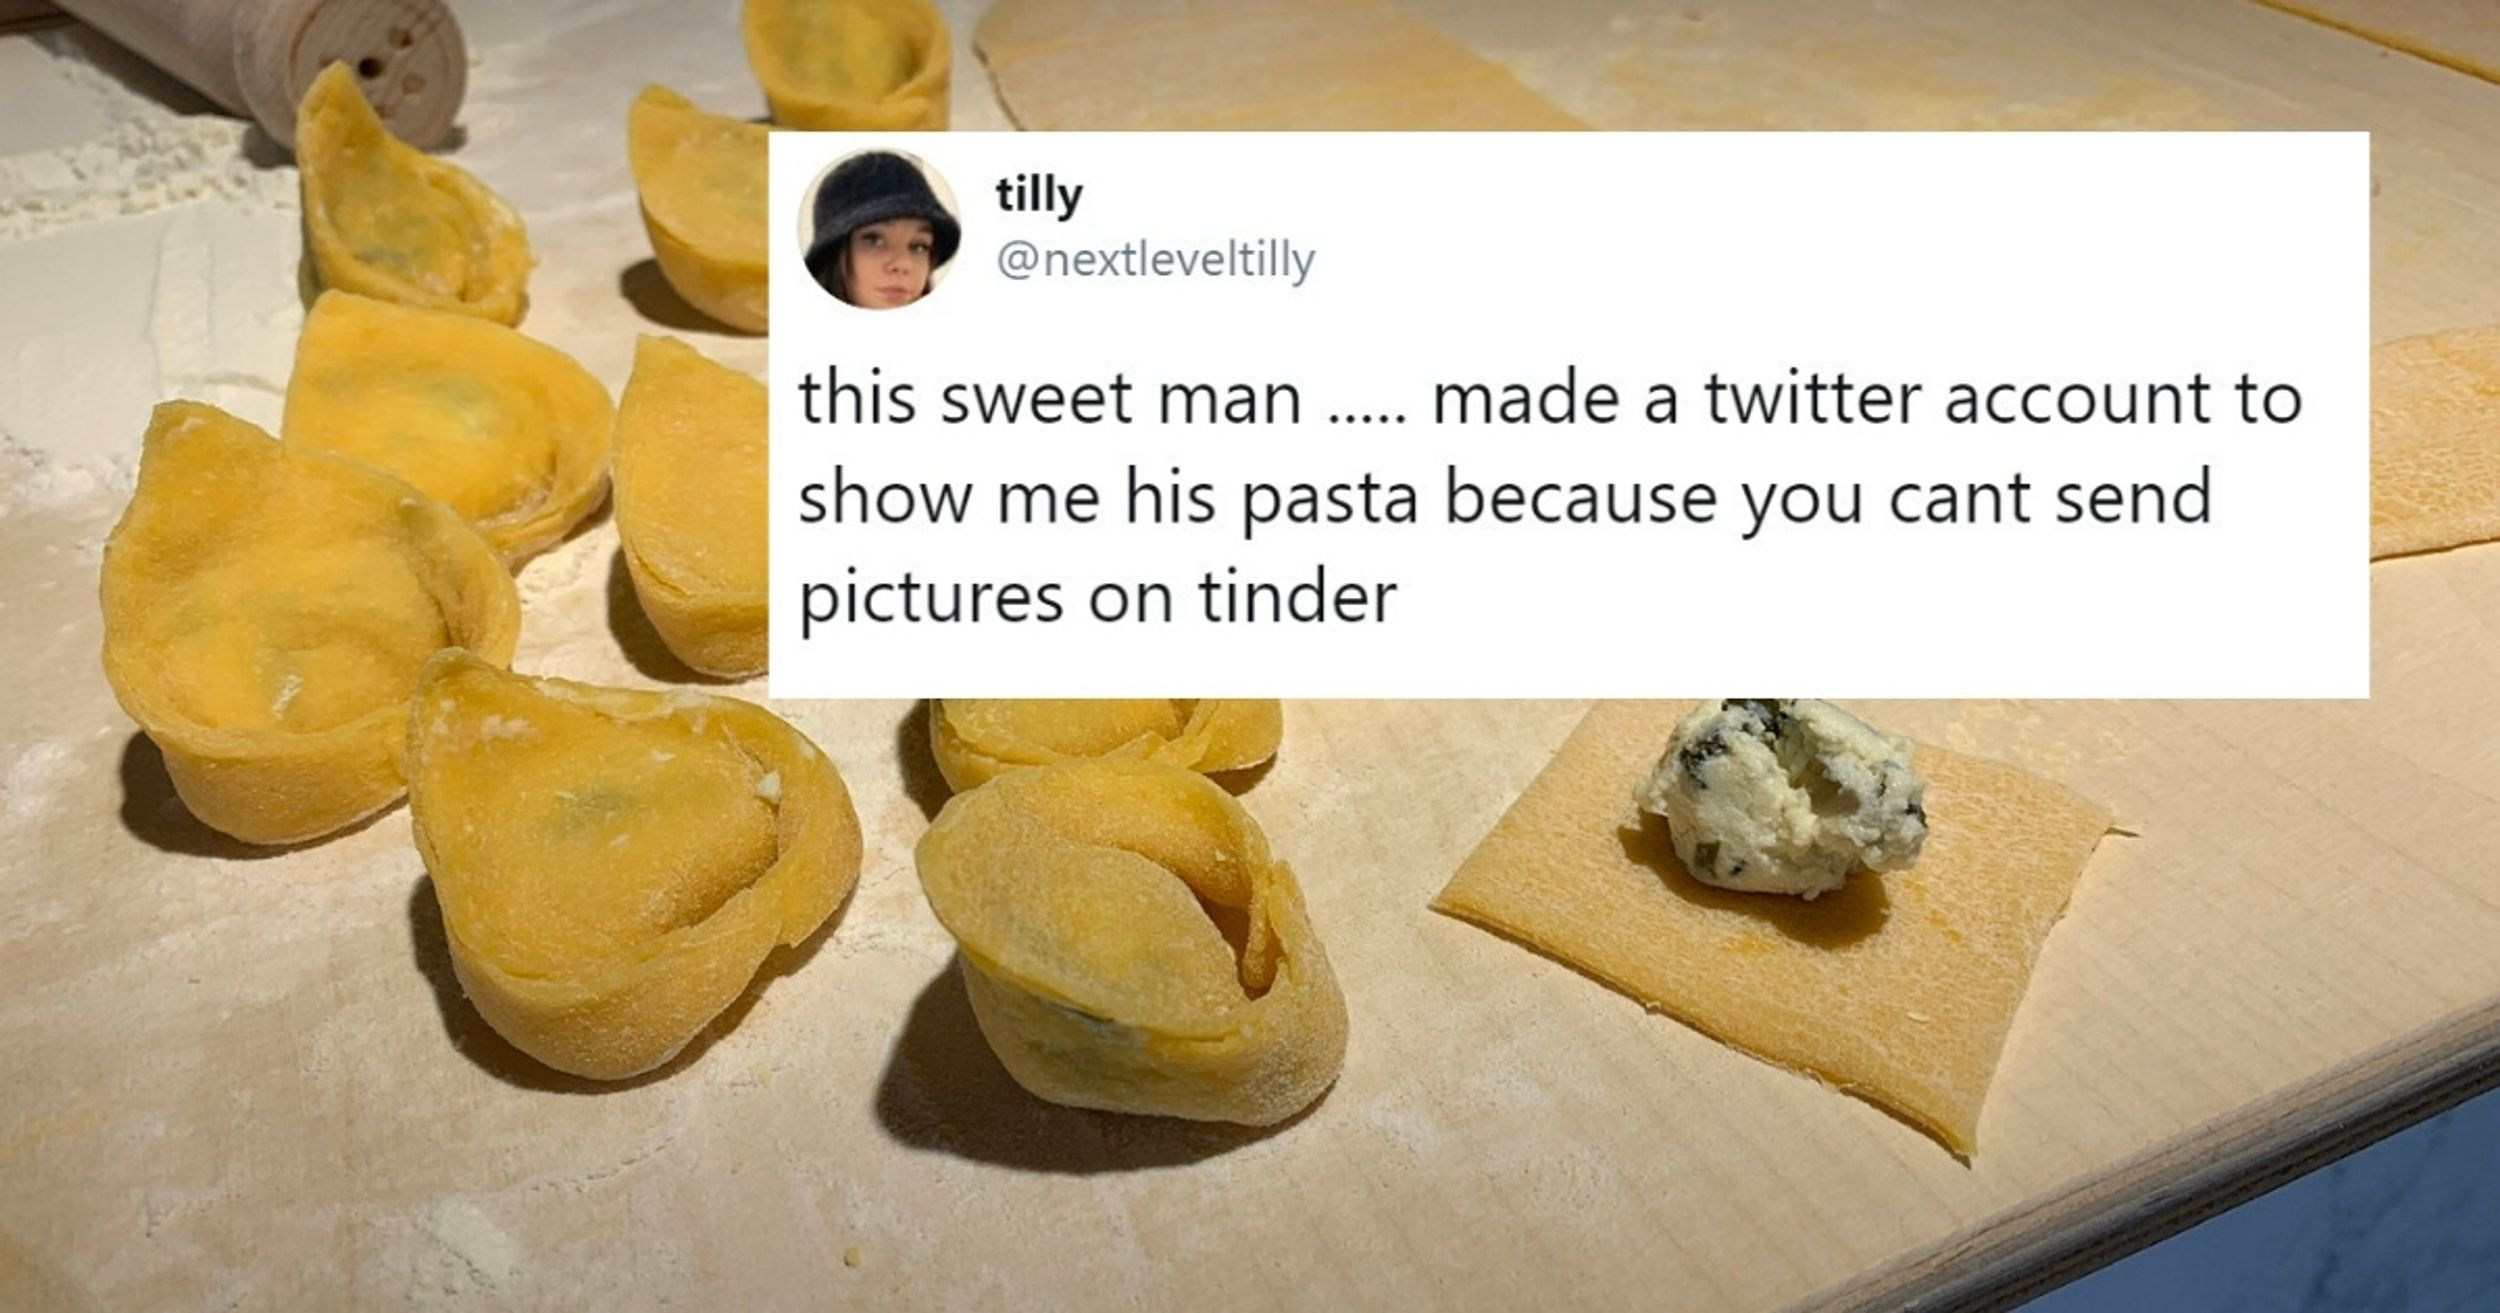 Guy Creates Twitter Account Devoted To His Pasta-Making Skills To Woo His Tinder Match